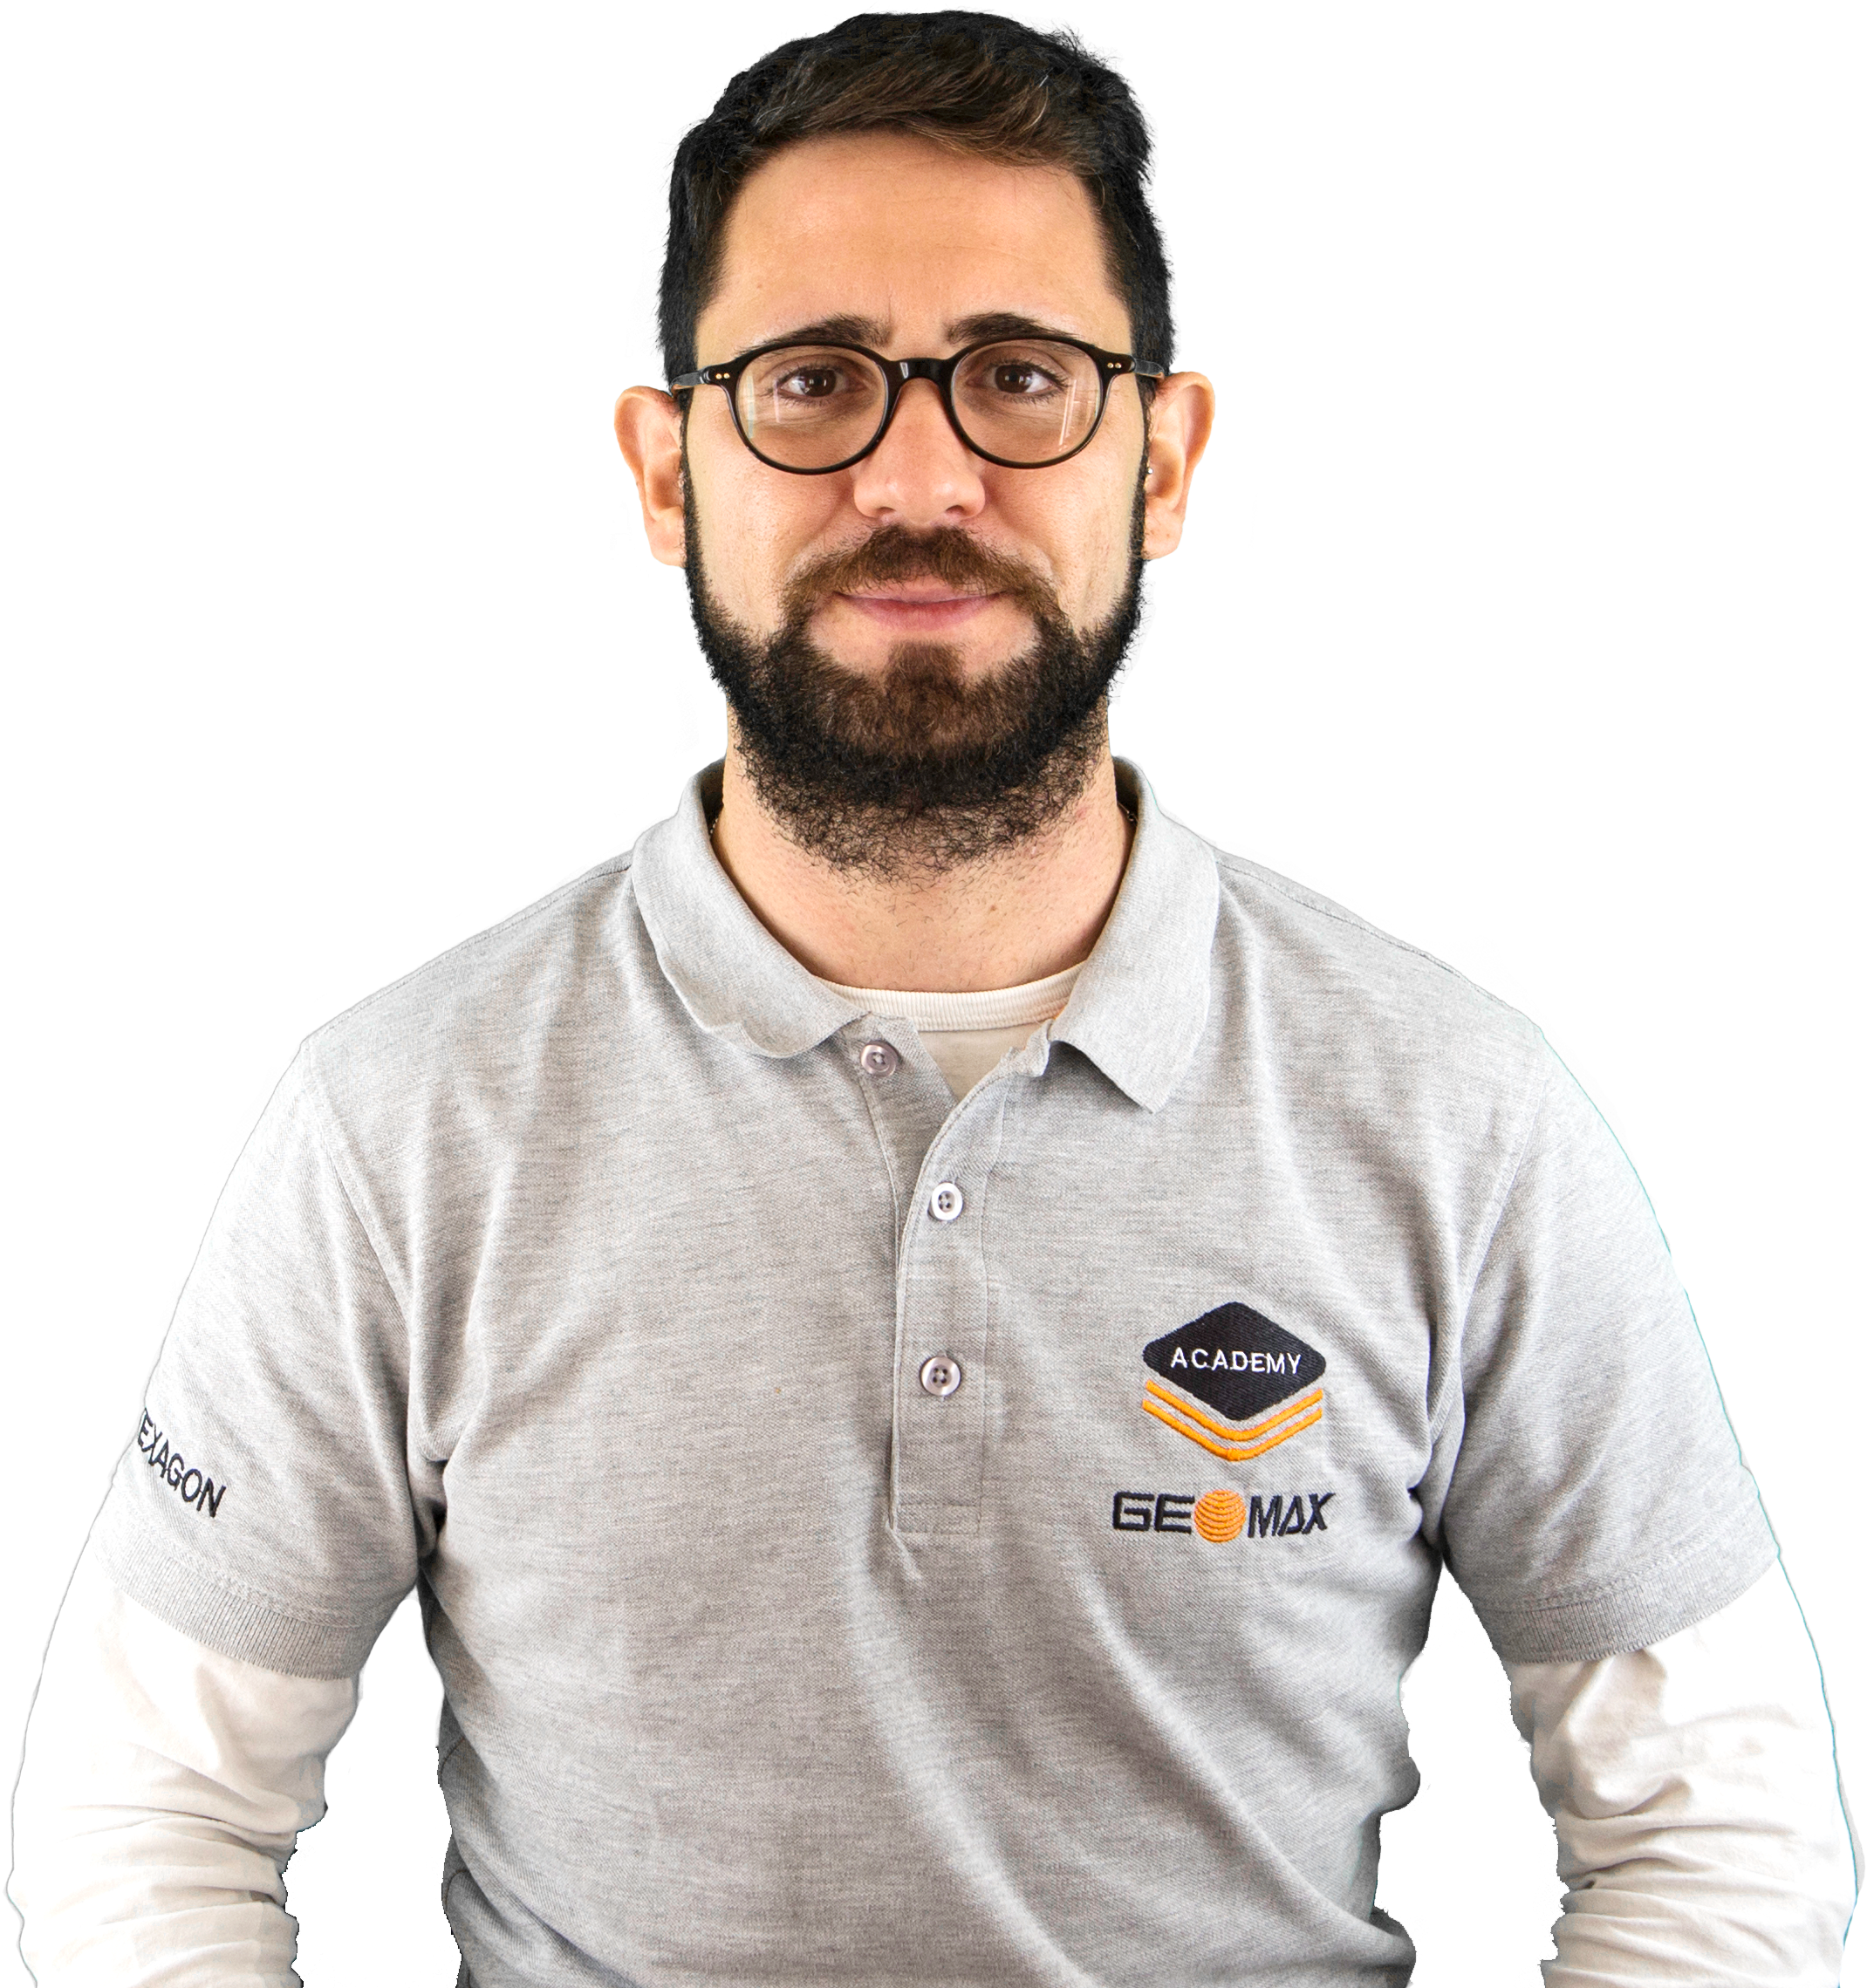 Product Expert and member of the Support Team Andrea Menghini